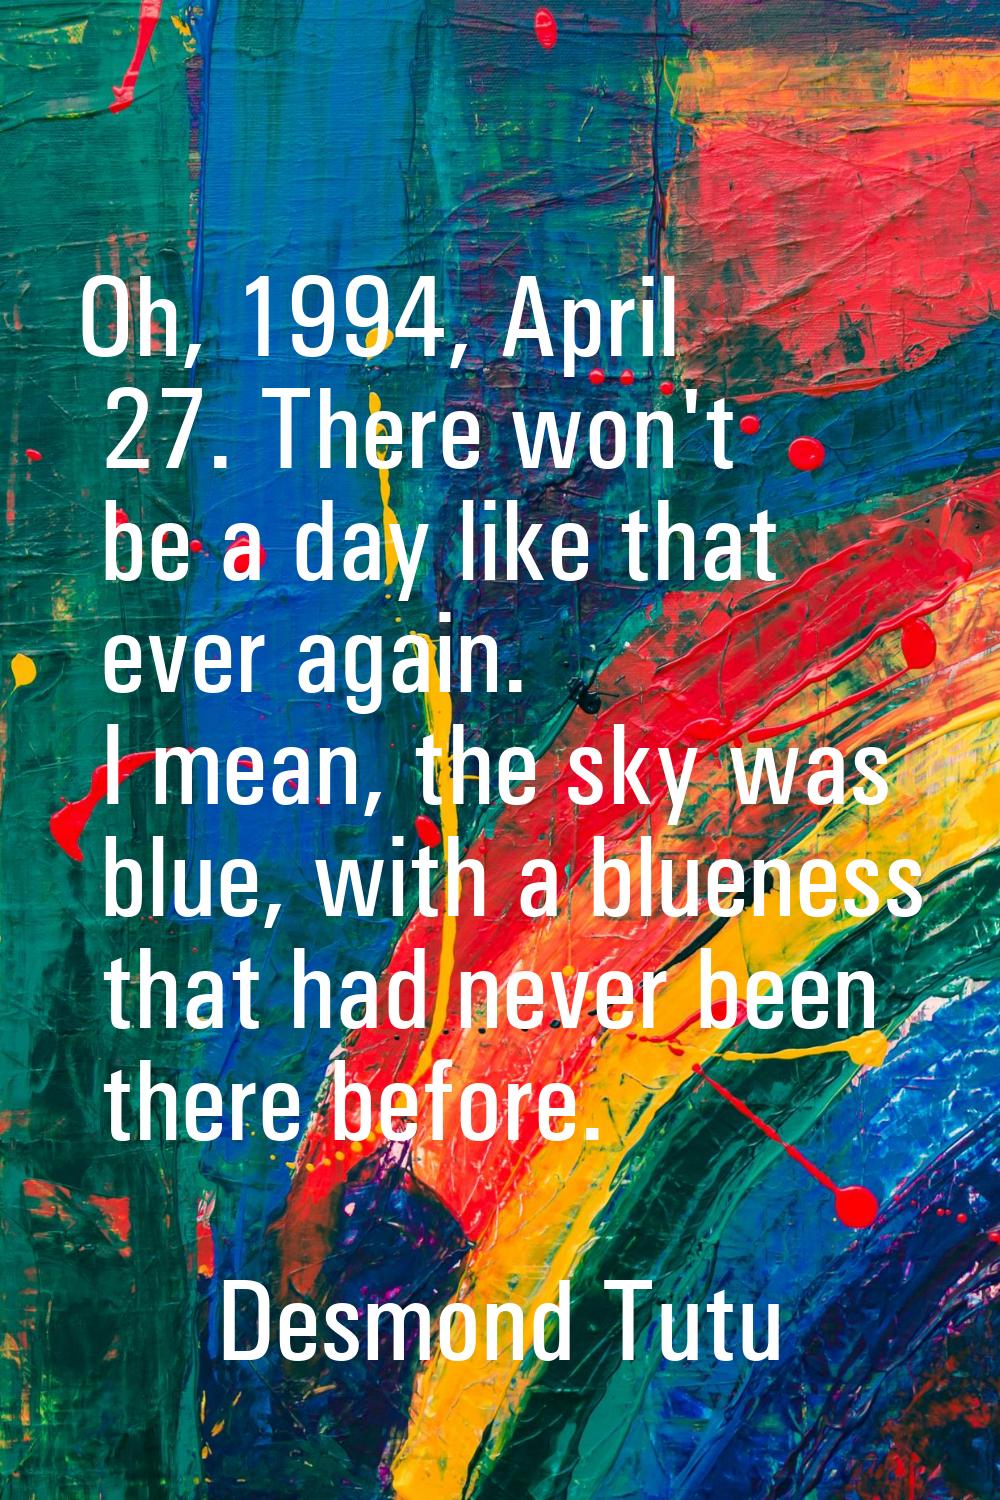 Oh, 1994, April 27. There won't be a day like that ever again. I mean, the sky was blue, with a blu